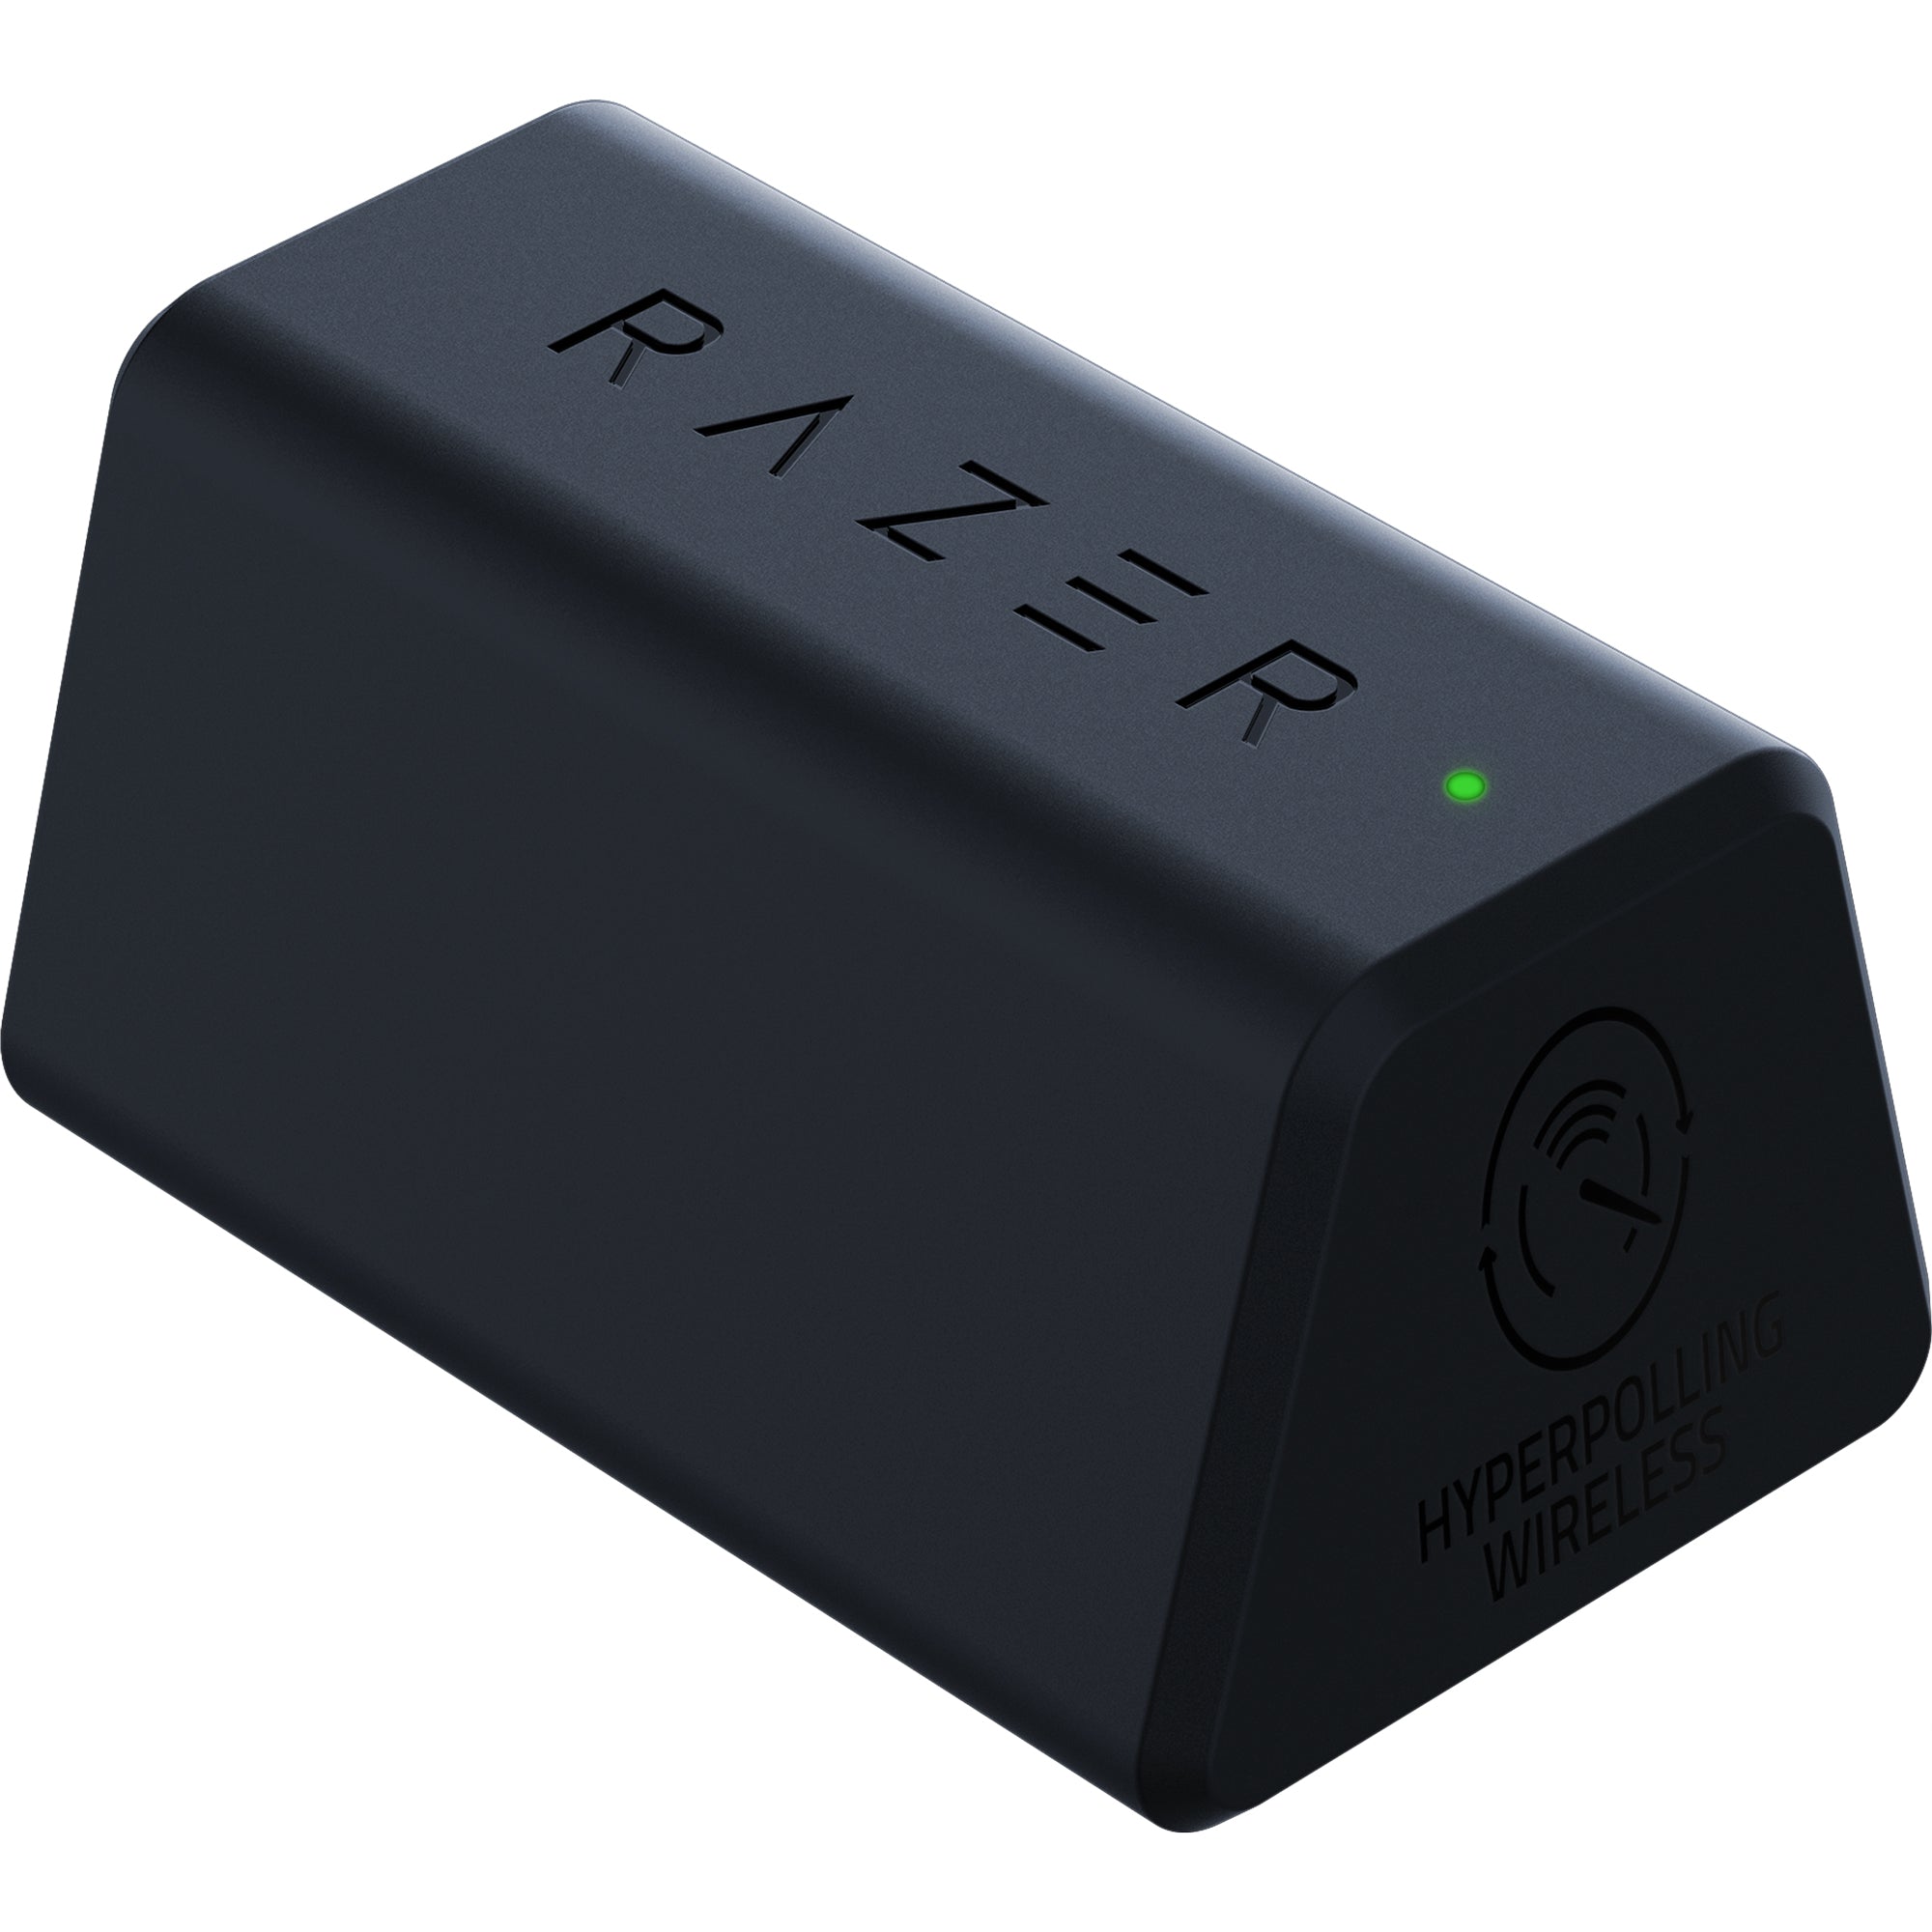 Razer HyperPolling Wireless Dongle レイザー ハイパーポーリング ワイヤレス ドングル